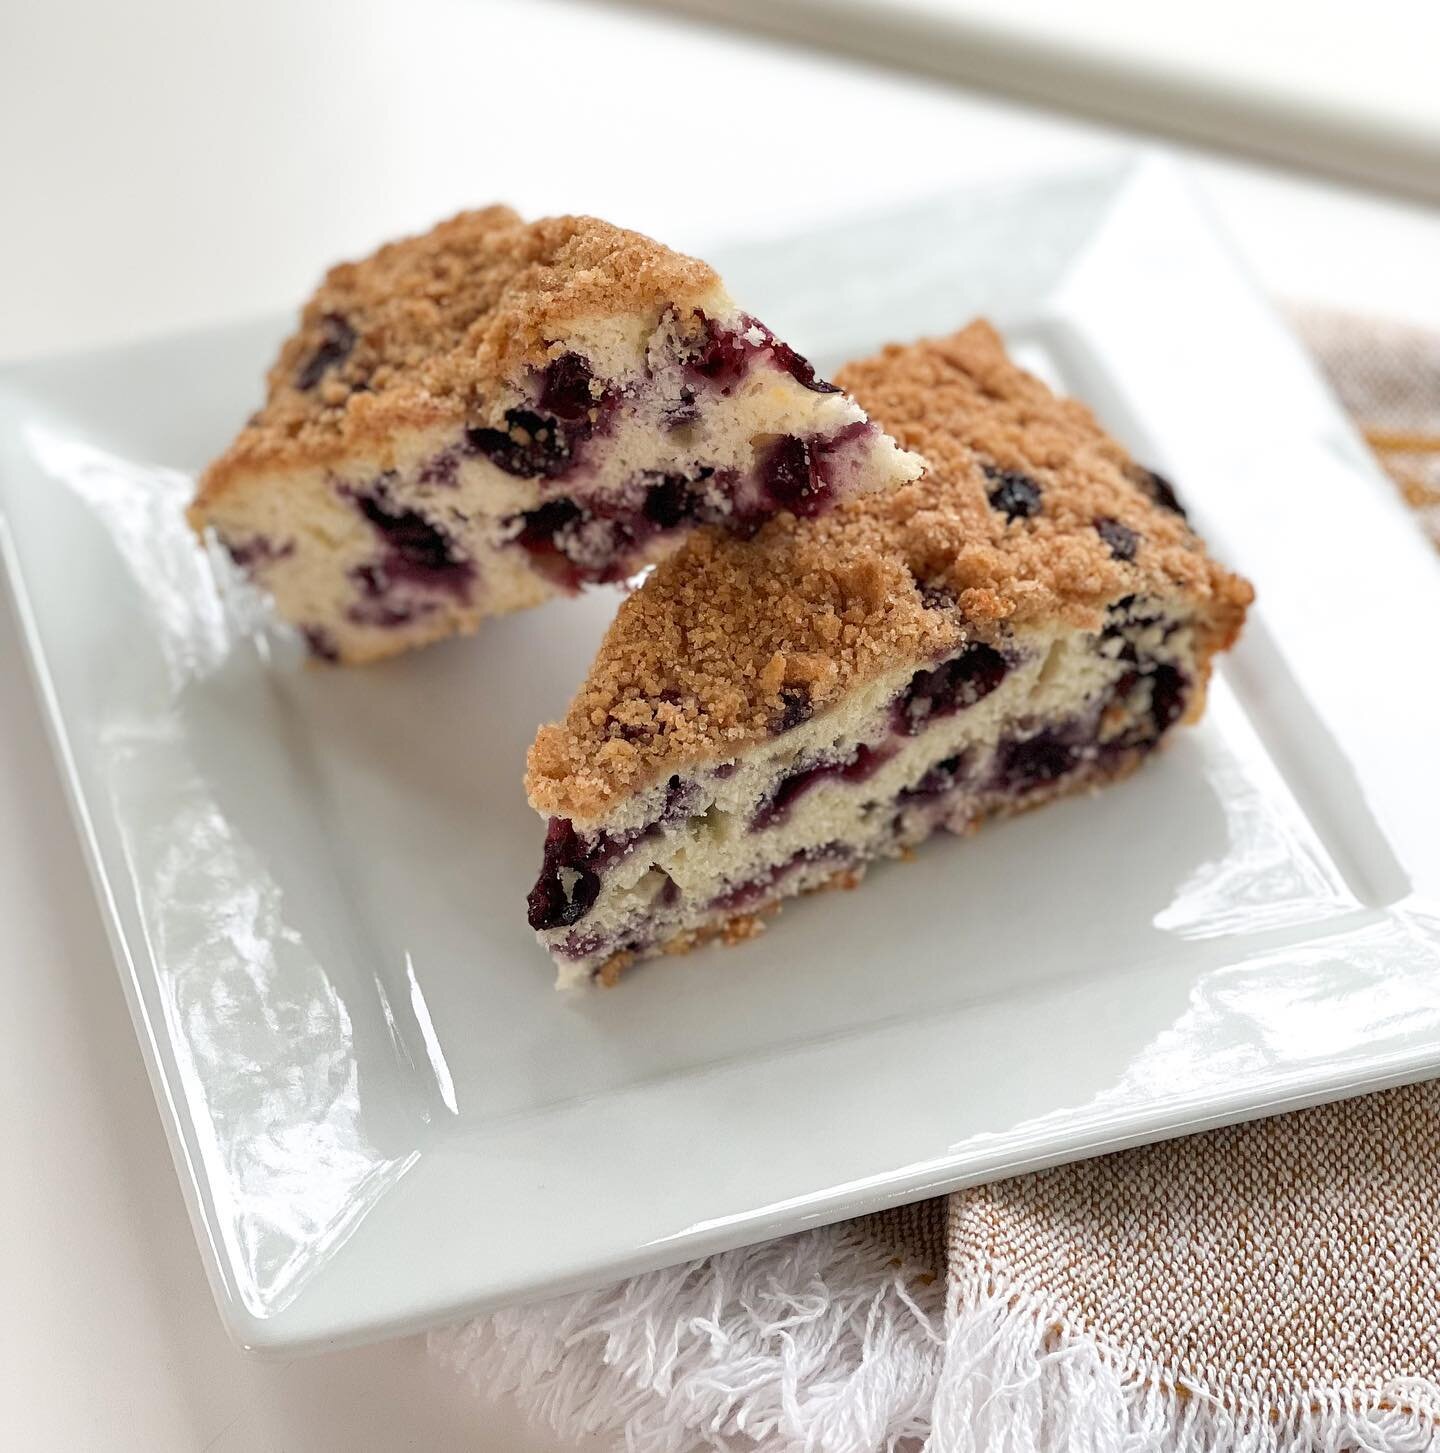 It&rsquo;s Thursday which means it&rsquo;s almost the weekend! Time to make something fun like this delicious blueberry coffee cake! Post yourself making something fun and tag us @thecutmi 

We truly value all of you and would love to feature our fol